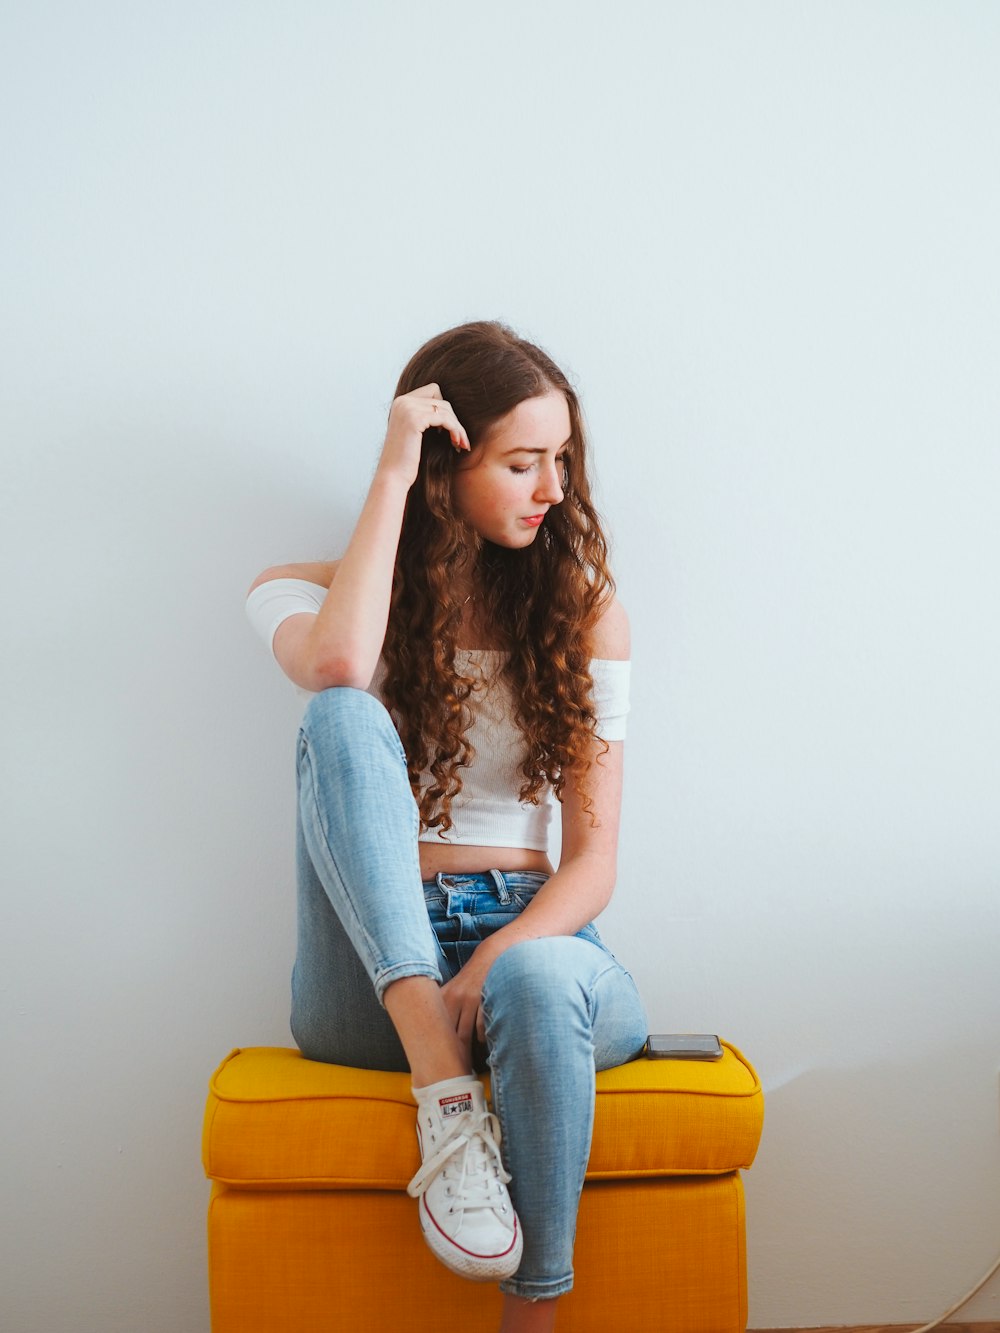 Woman in blue denim jeans sitting on yellow chair photo – Free London Image  on Unsplash